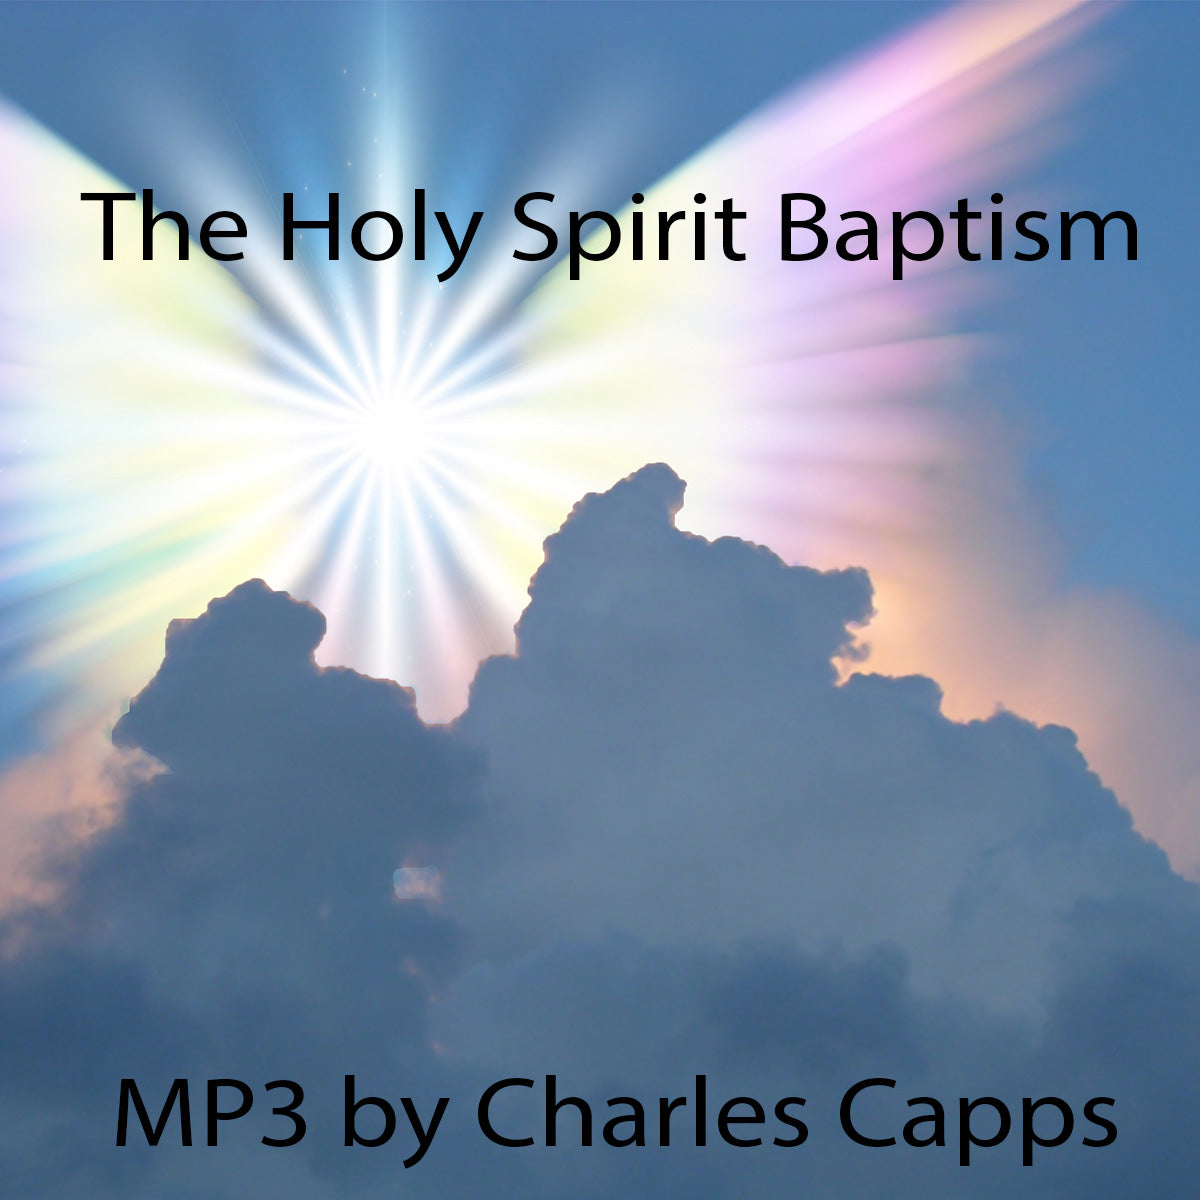 The baptism with the holy spirit english edition